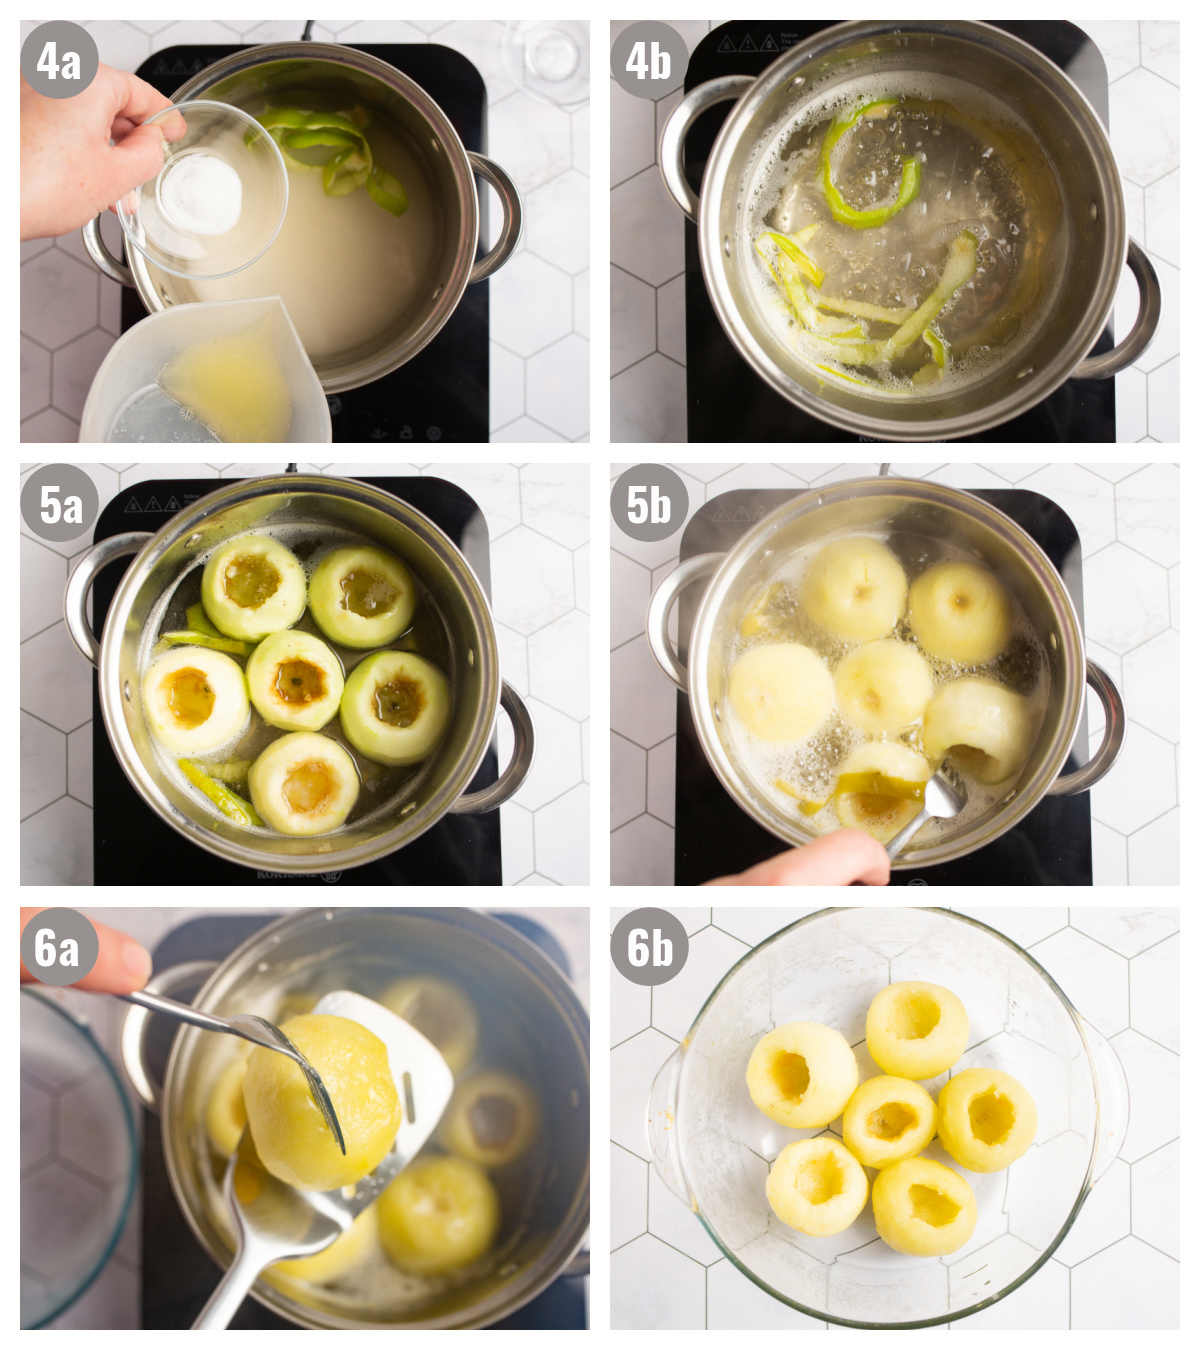 Apples cooked in six photos.